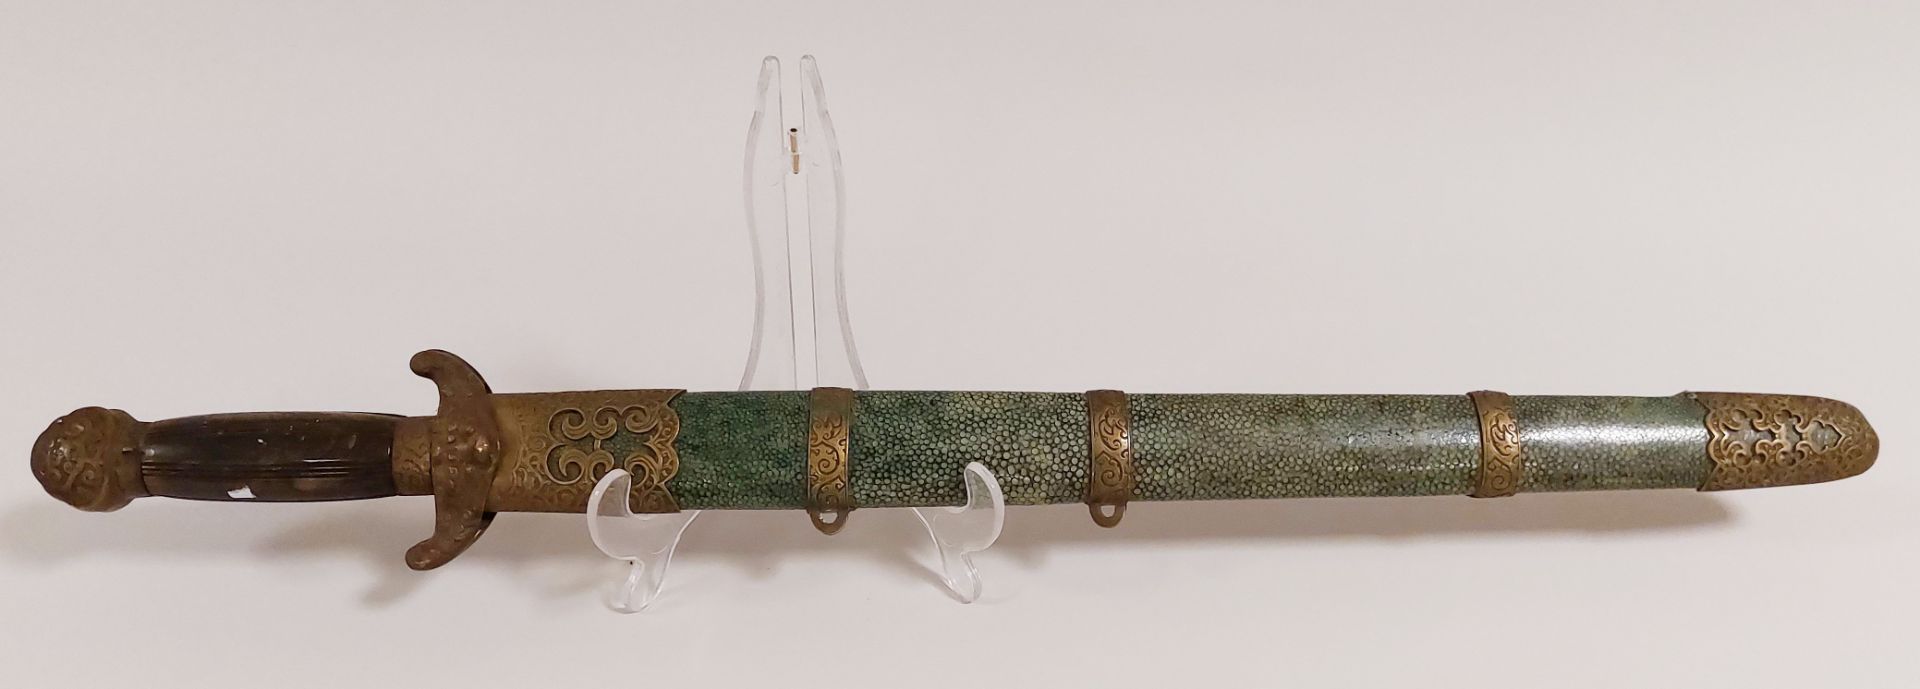 Rare Chinese/Japanese double sword - Image 4 of 4